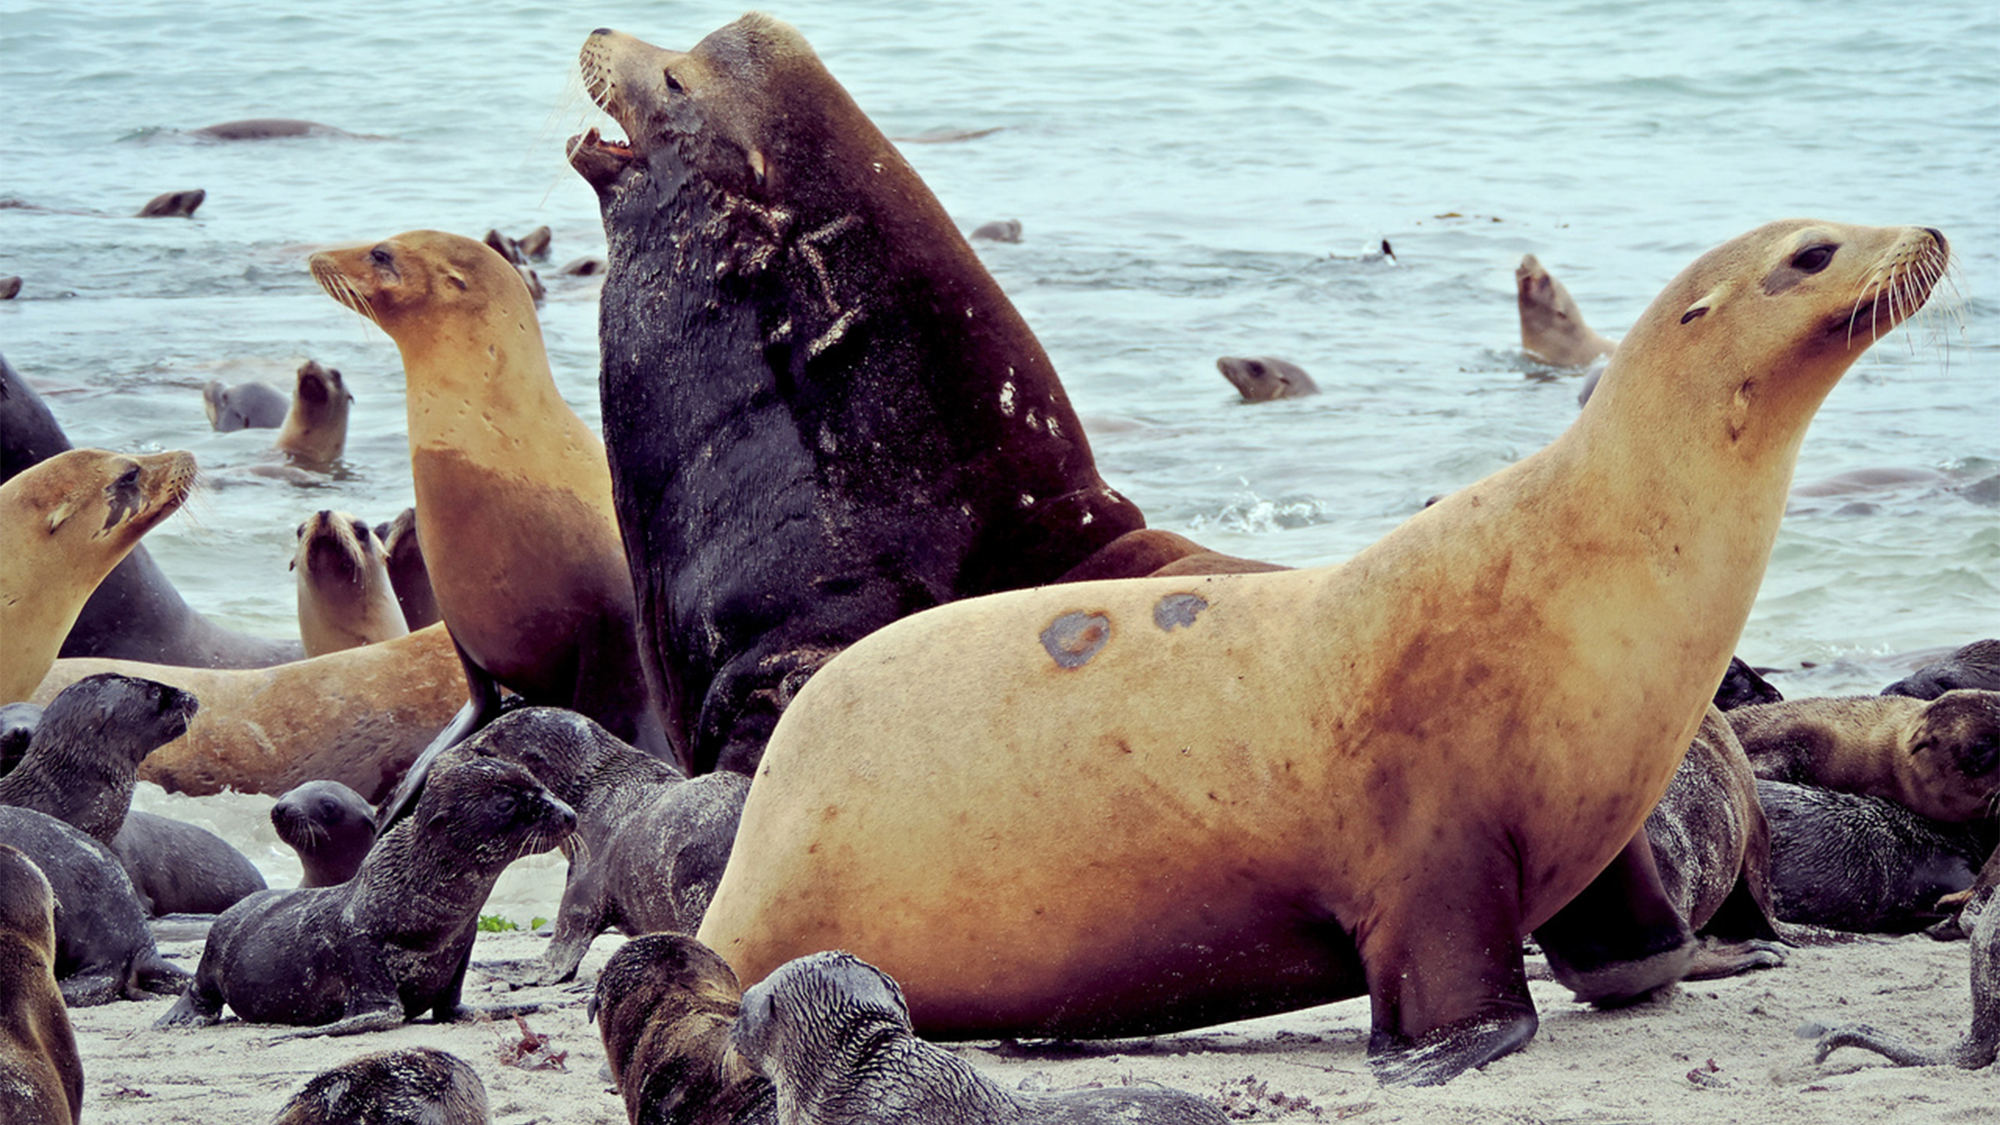 Male California sea lions have gotten bigger and better at fighting